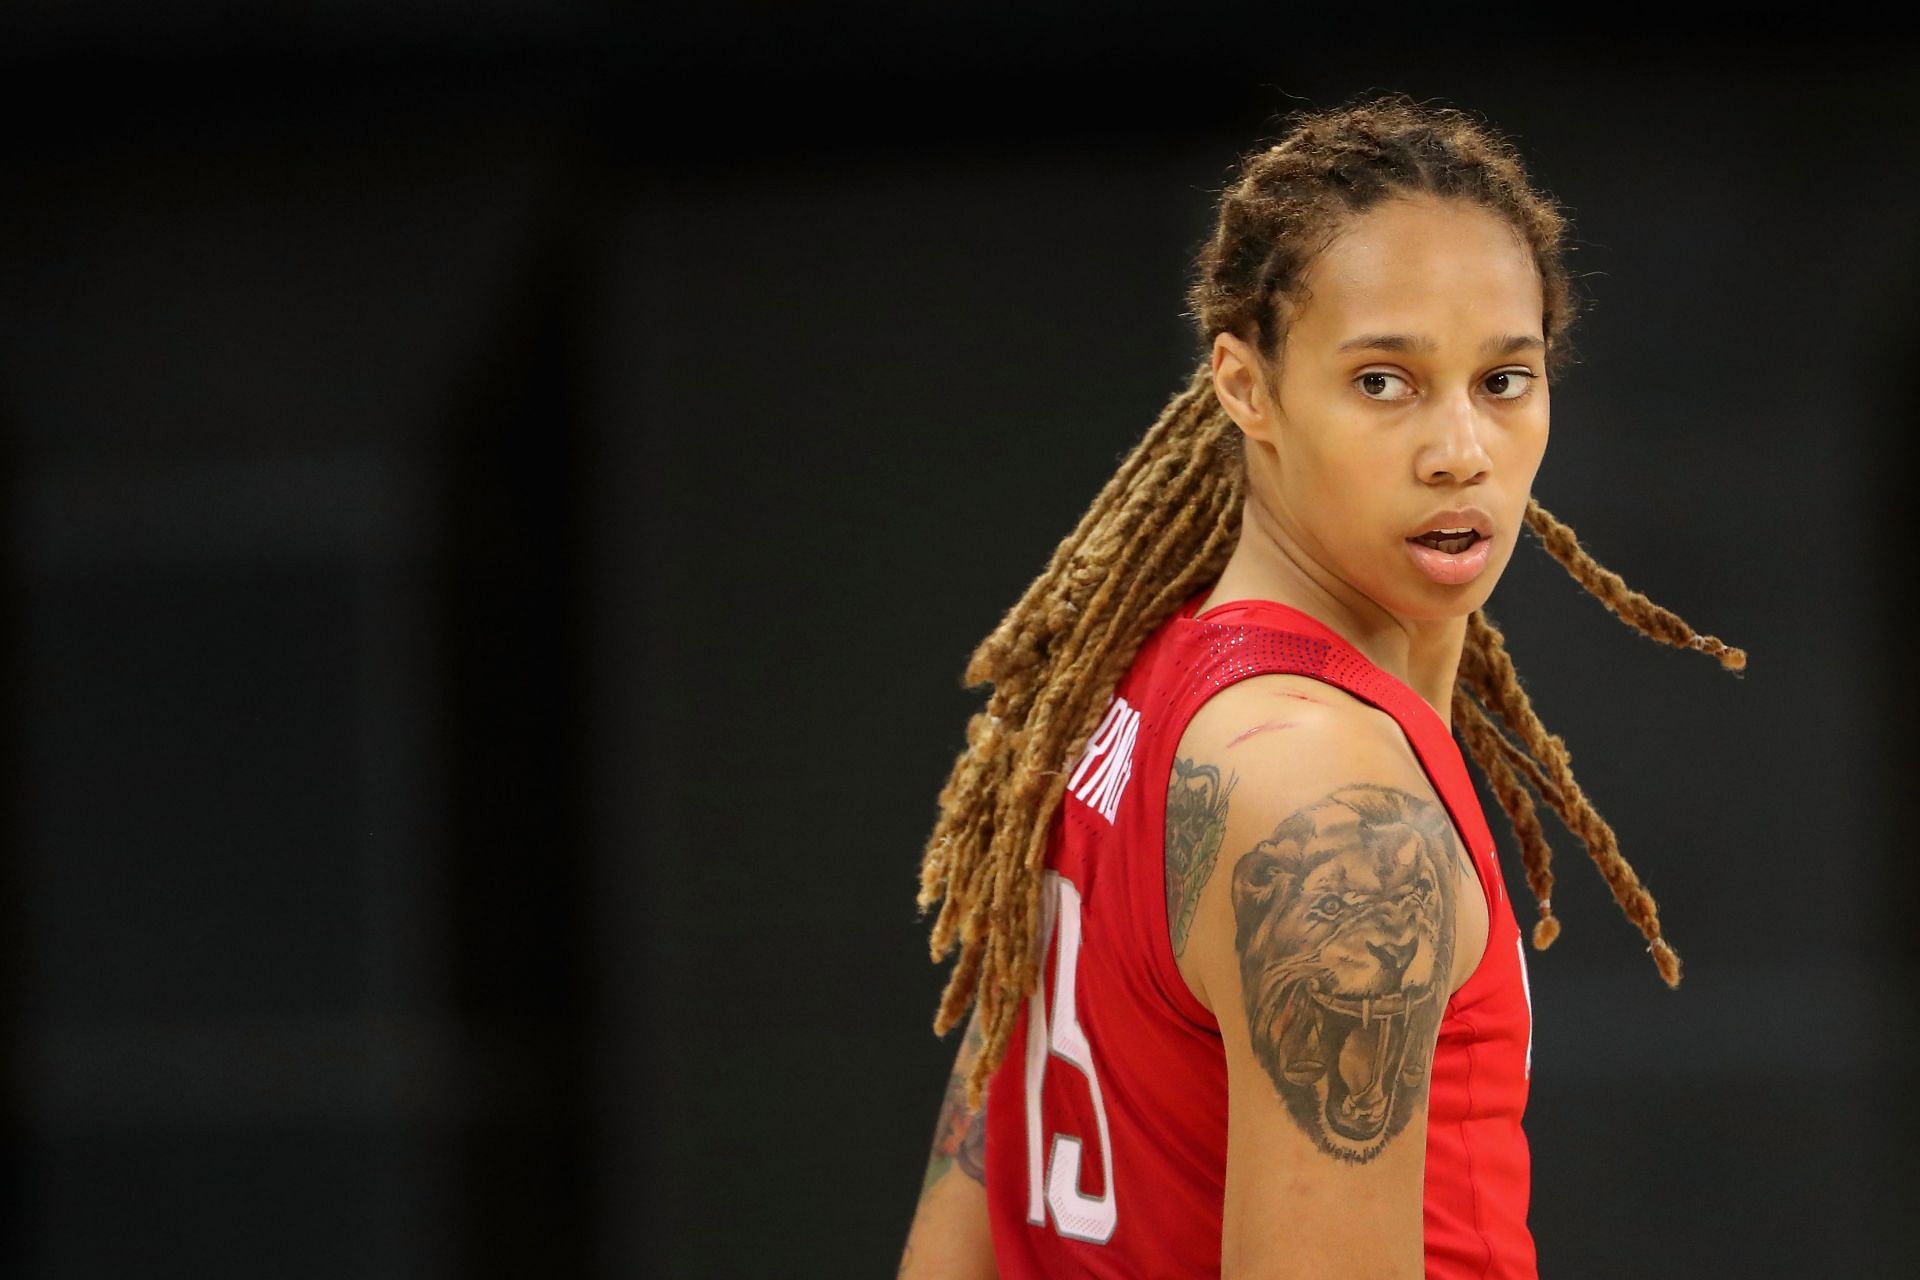 Brittney Griner has spent a lot of time playing overseas (Image via Getty Images)